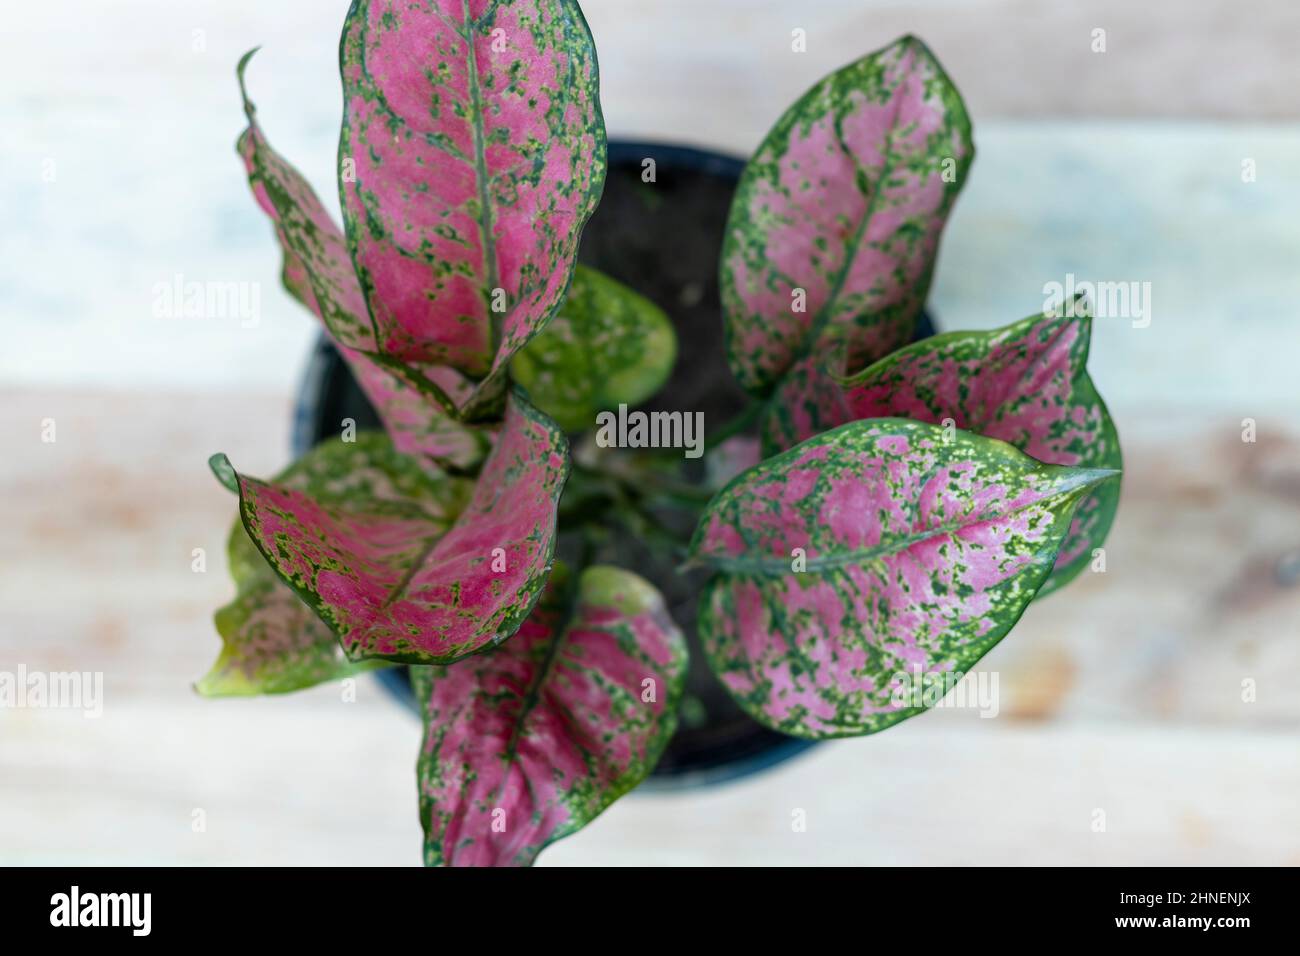 Aglaonema pink chinese evergreen plant with selective focus Stock Photo